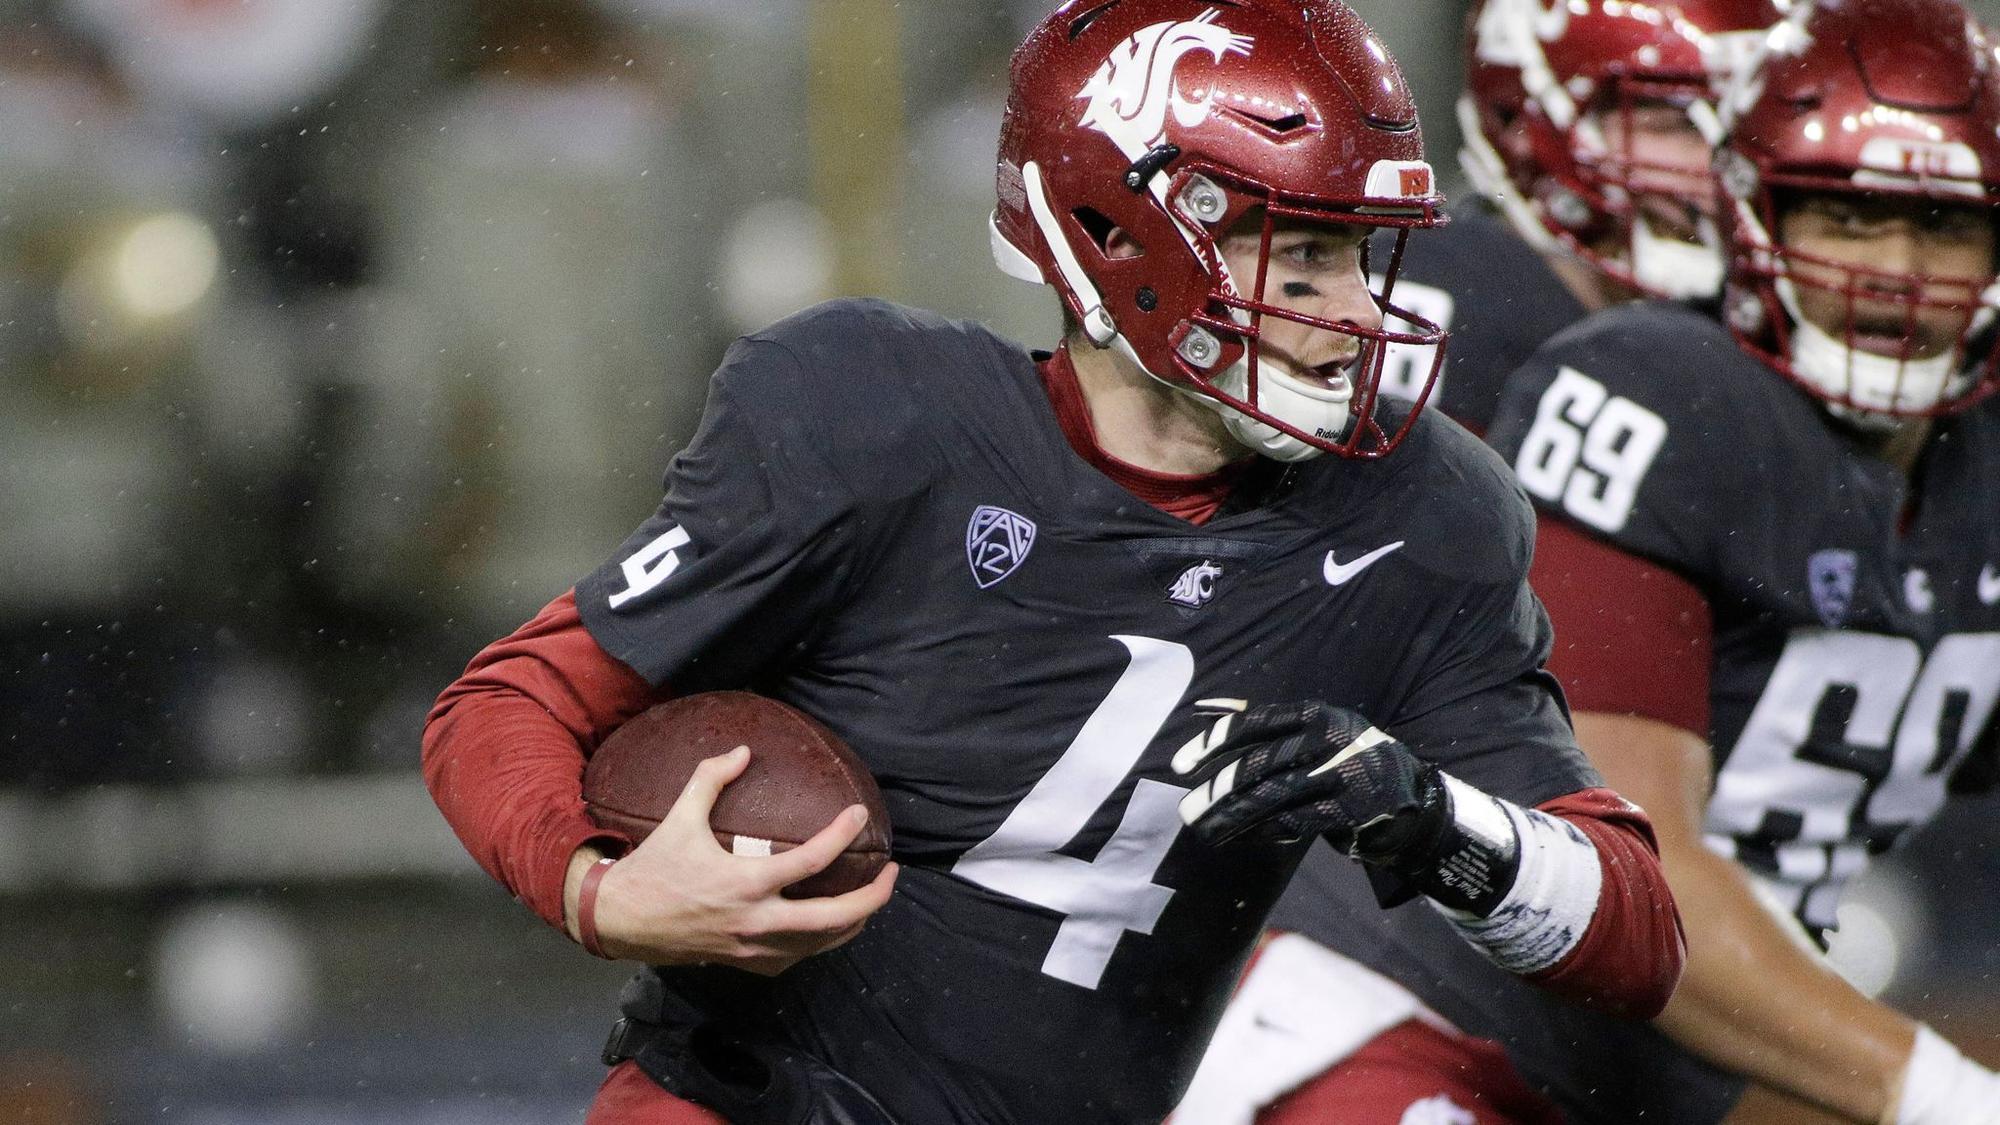 With QB Falk out, Washington State's offense struggles